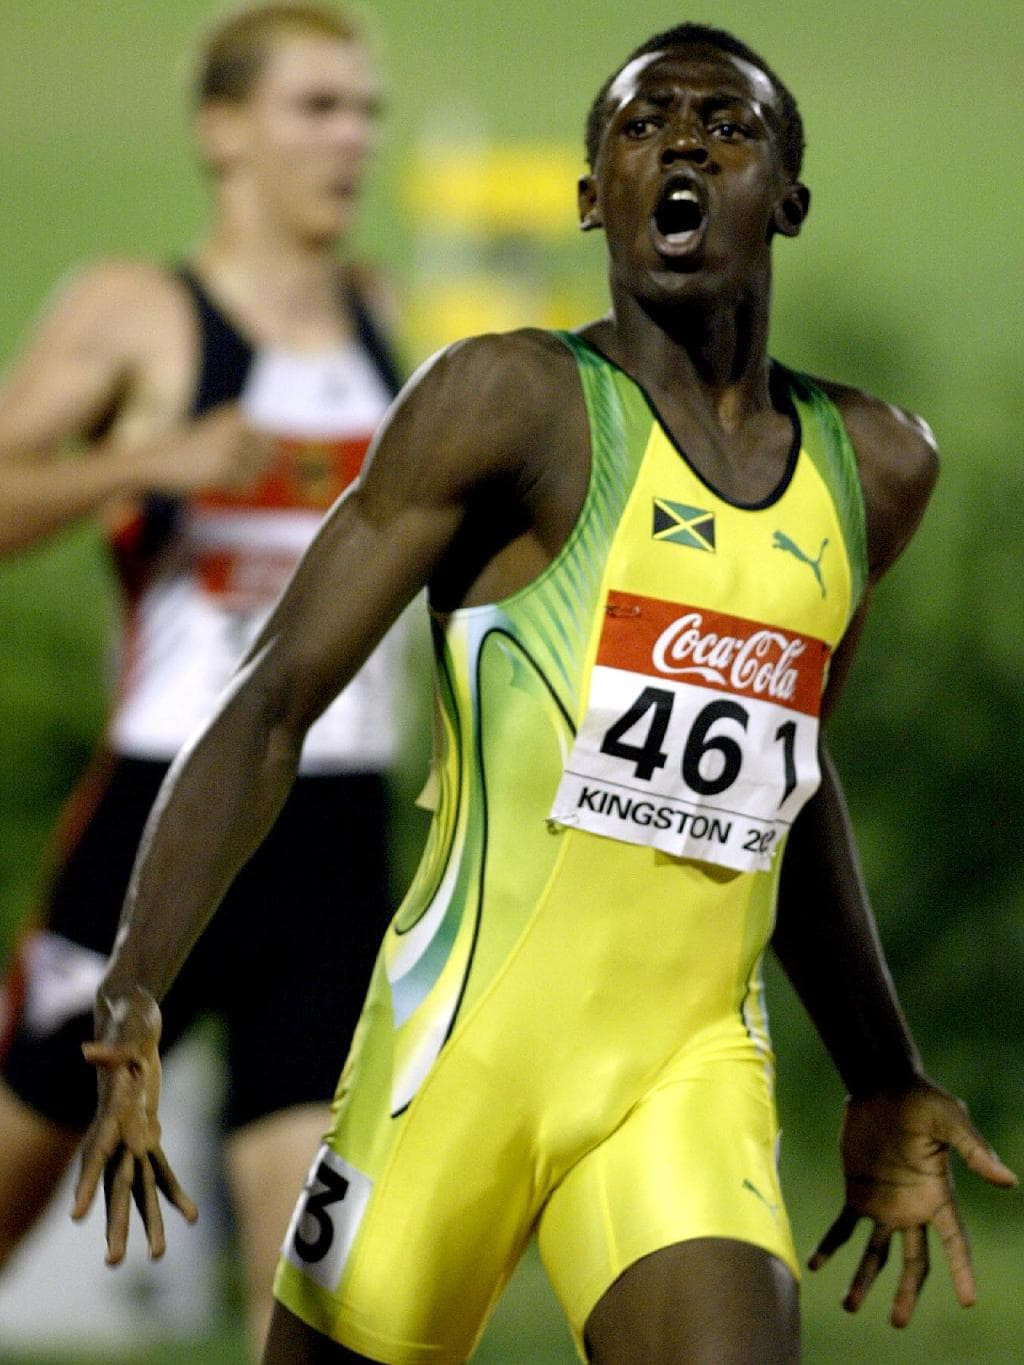 The international career of Usain Bolt was launched when he won the 200 metres at the 2002 IAAF World Junior Championships in front of a home crowd in Kingston ©Getty Images 